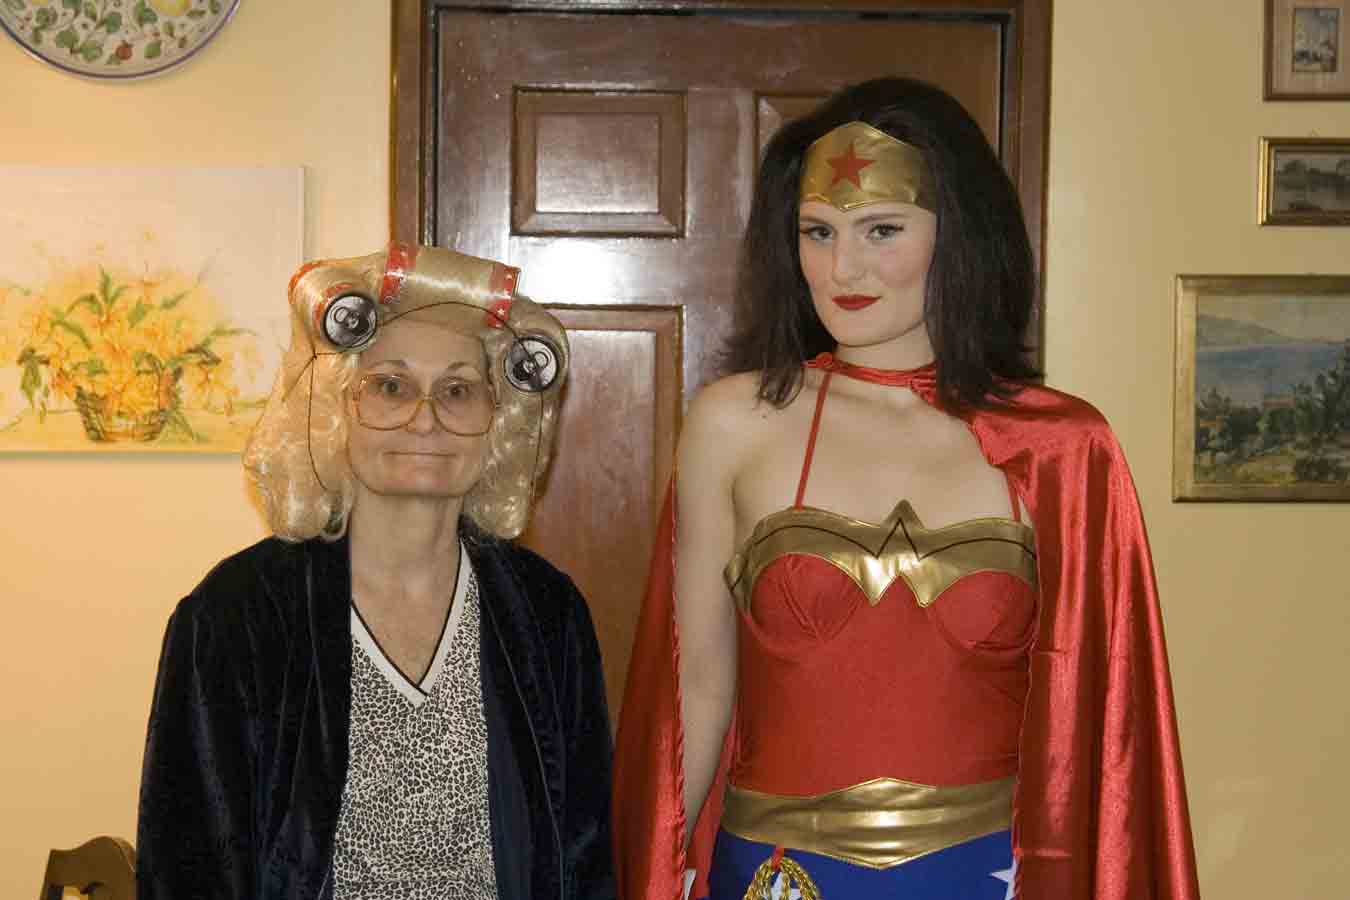 Cousin Ruthie and Mary Chieffo as Wonder Woman